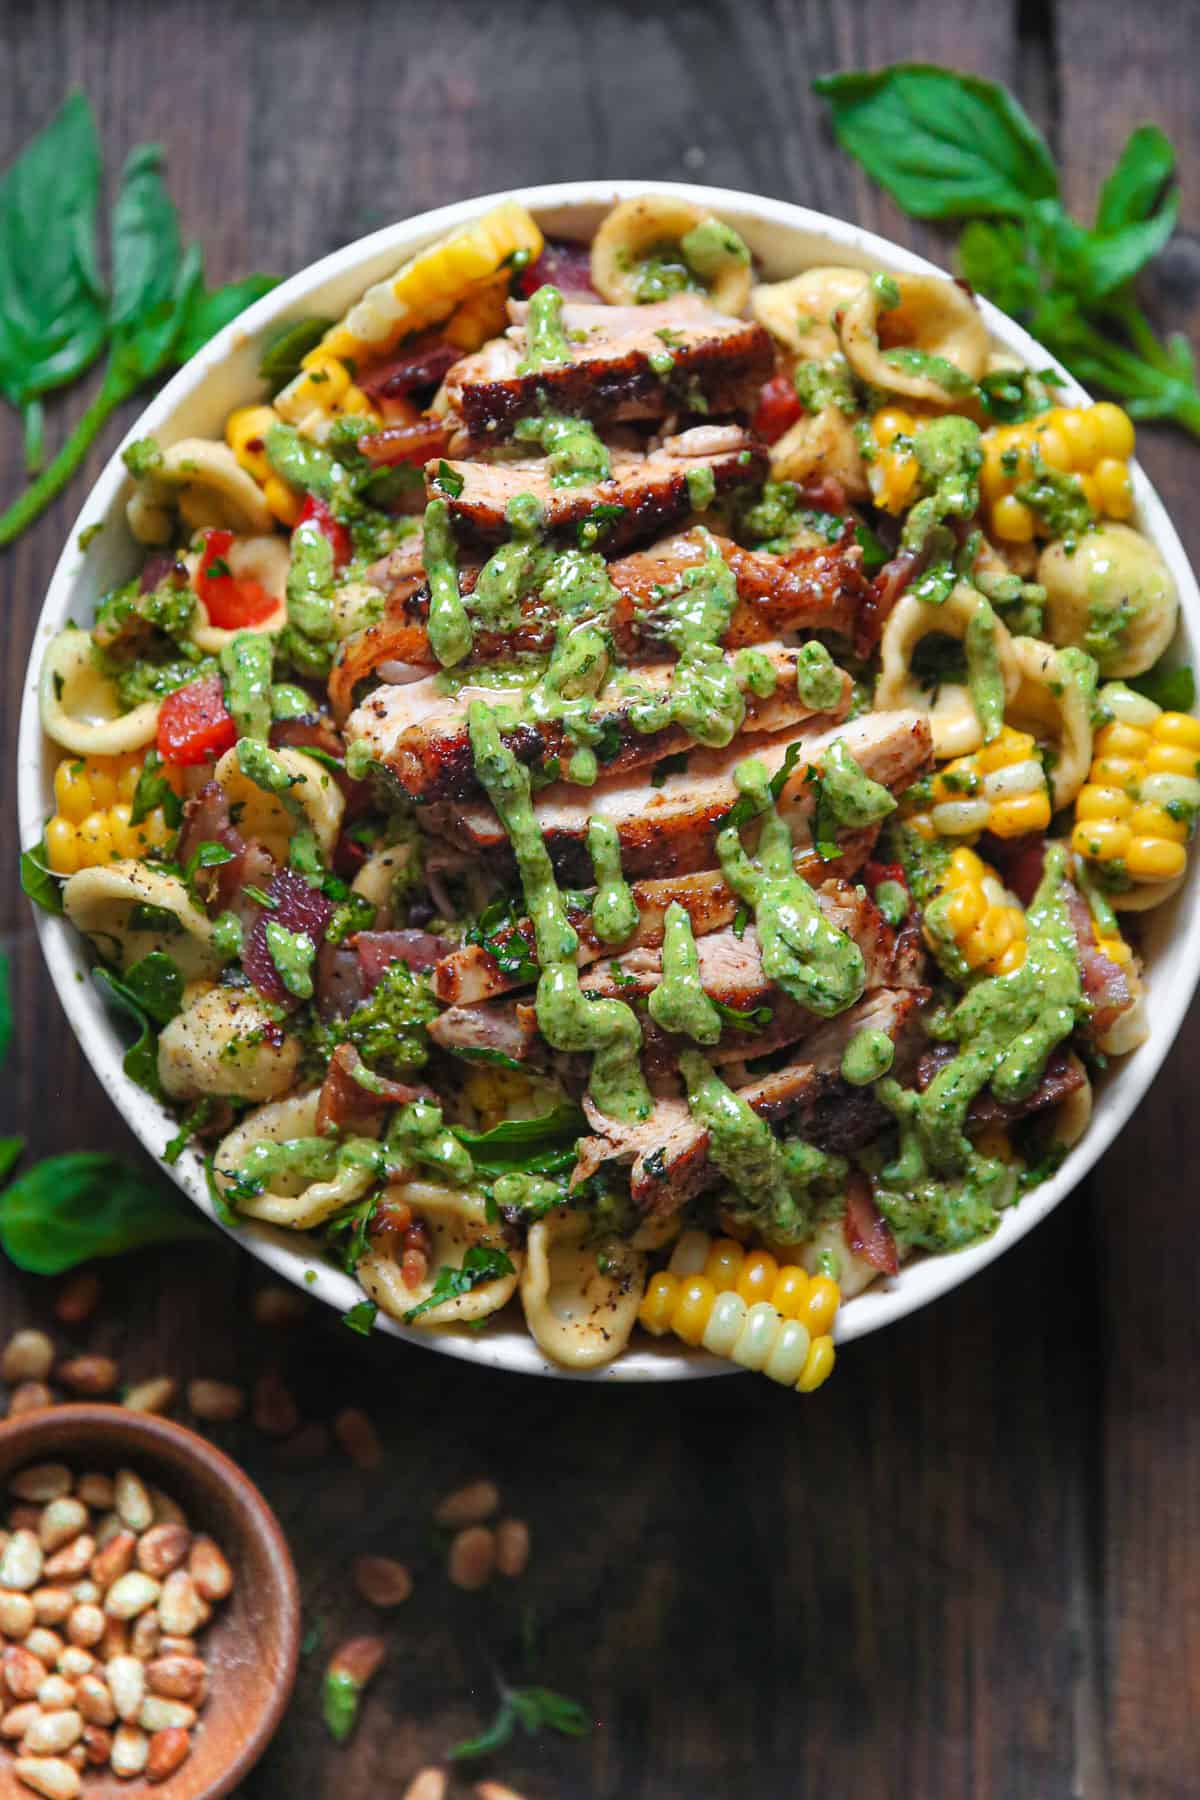 Chicken and Corn Pasta Salad with Bacon, Bell Peppers, and Creamy Basil Pesto Dressing - in a white bowl.